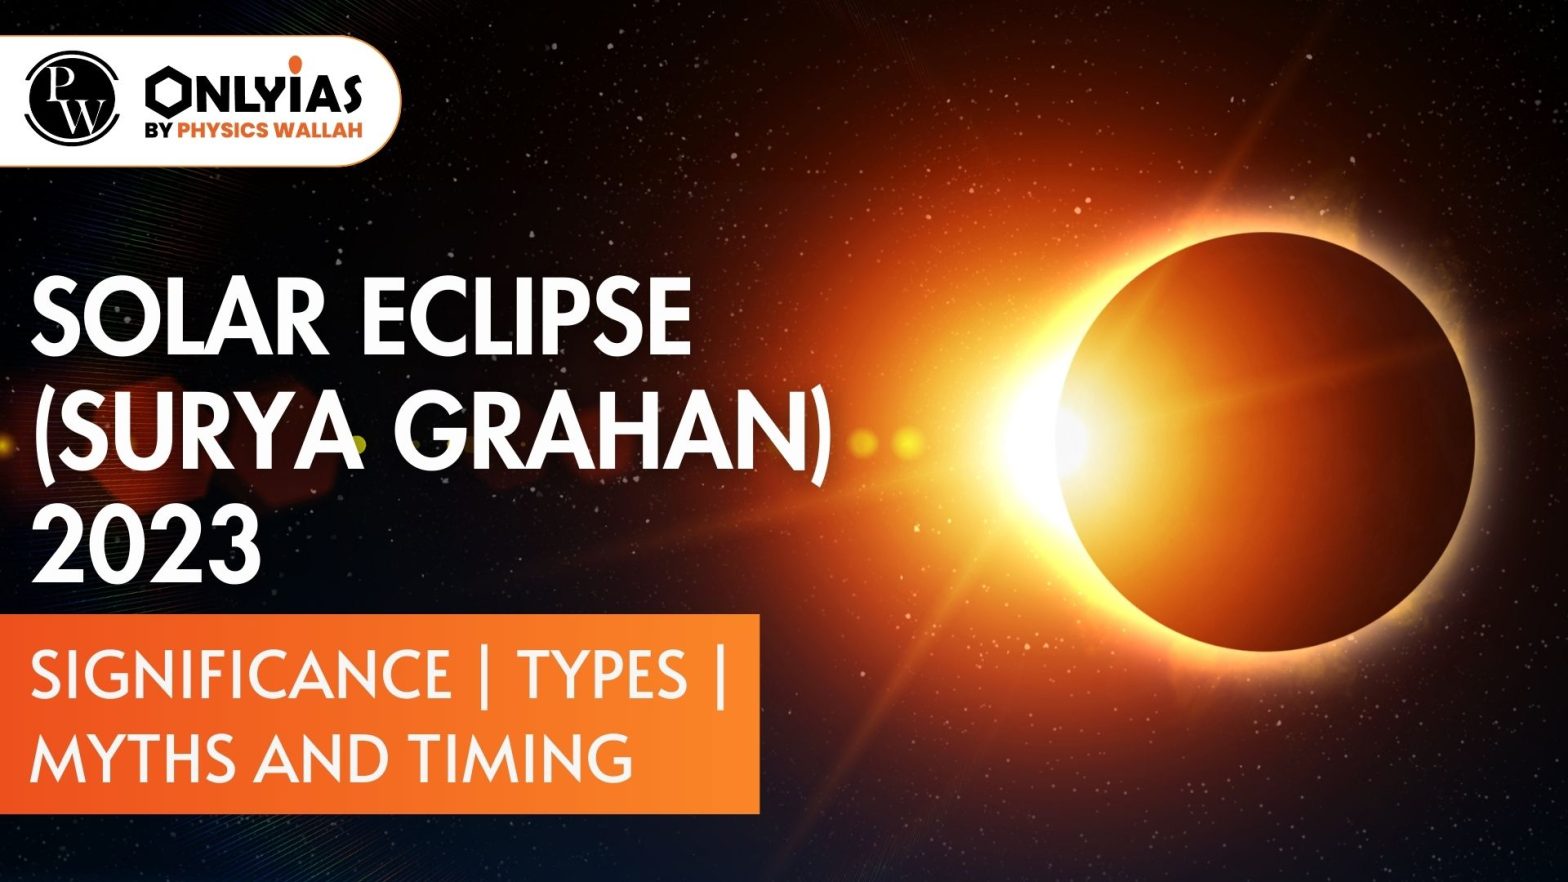 Solar Eclipse 2023 (Surya Grahan): Significance, Types, Myths and Timing